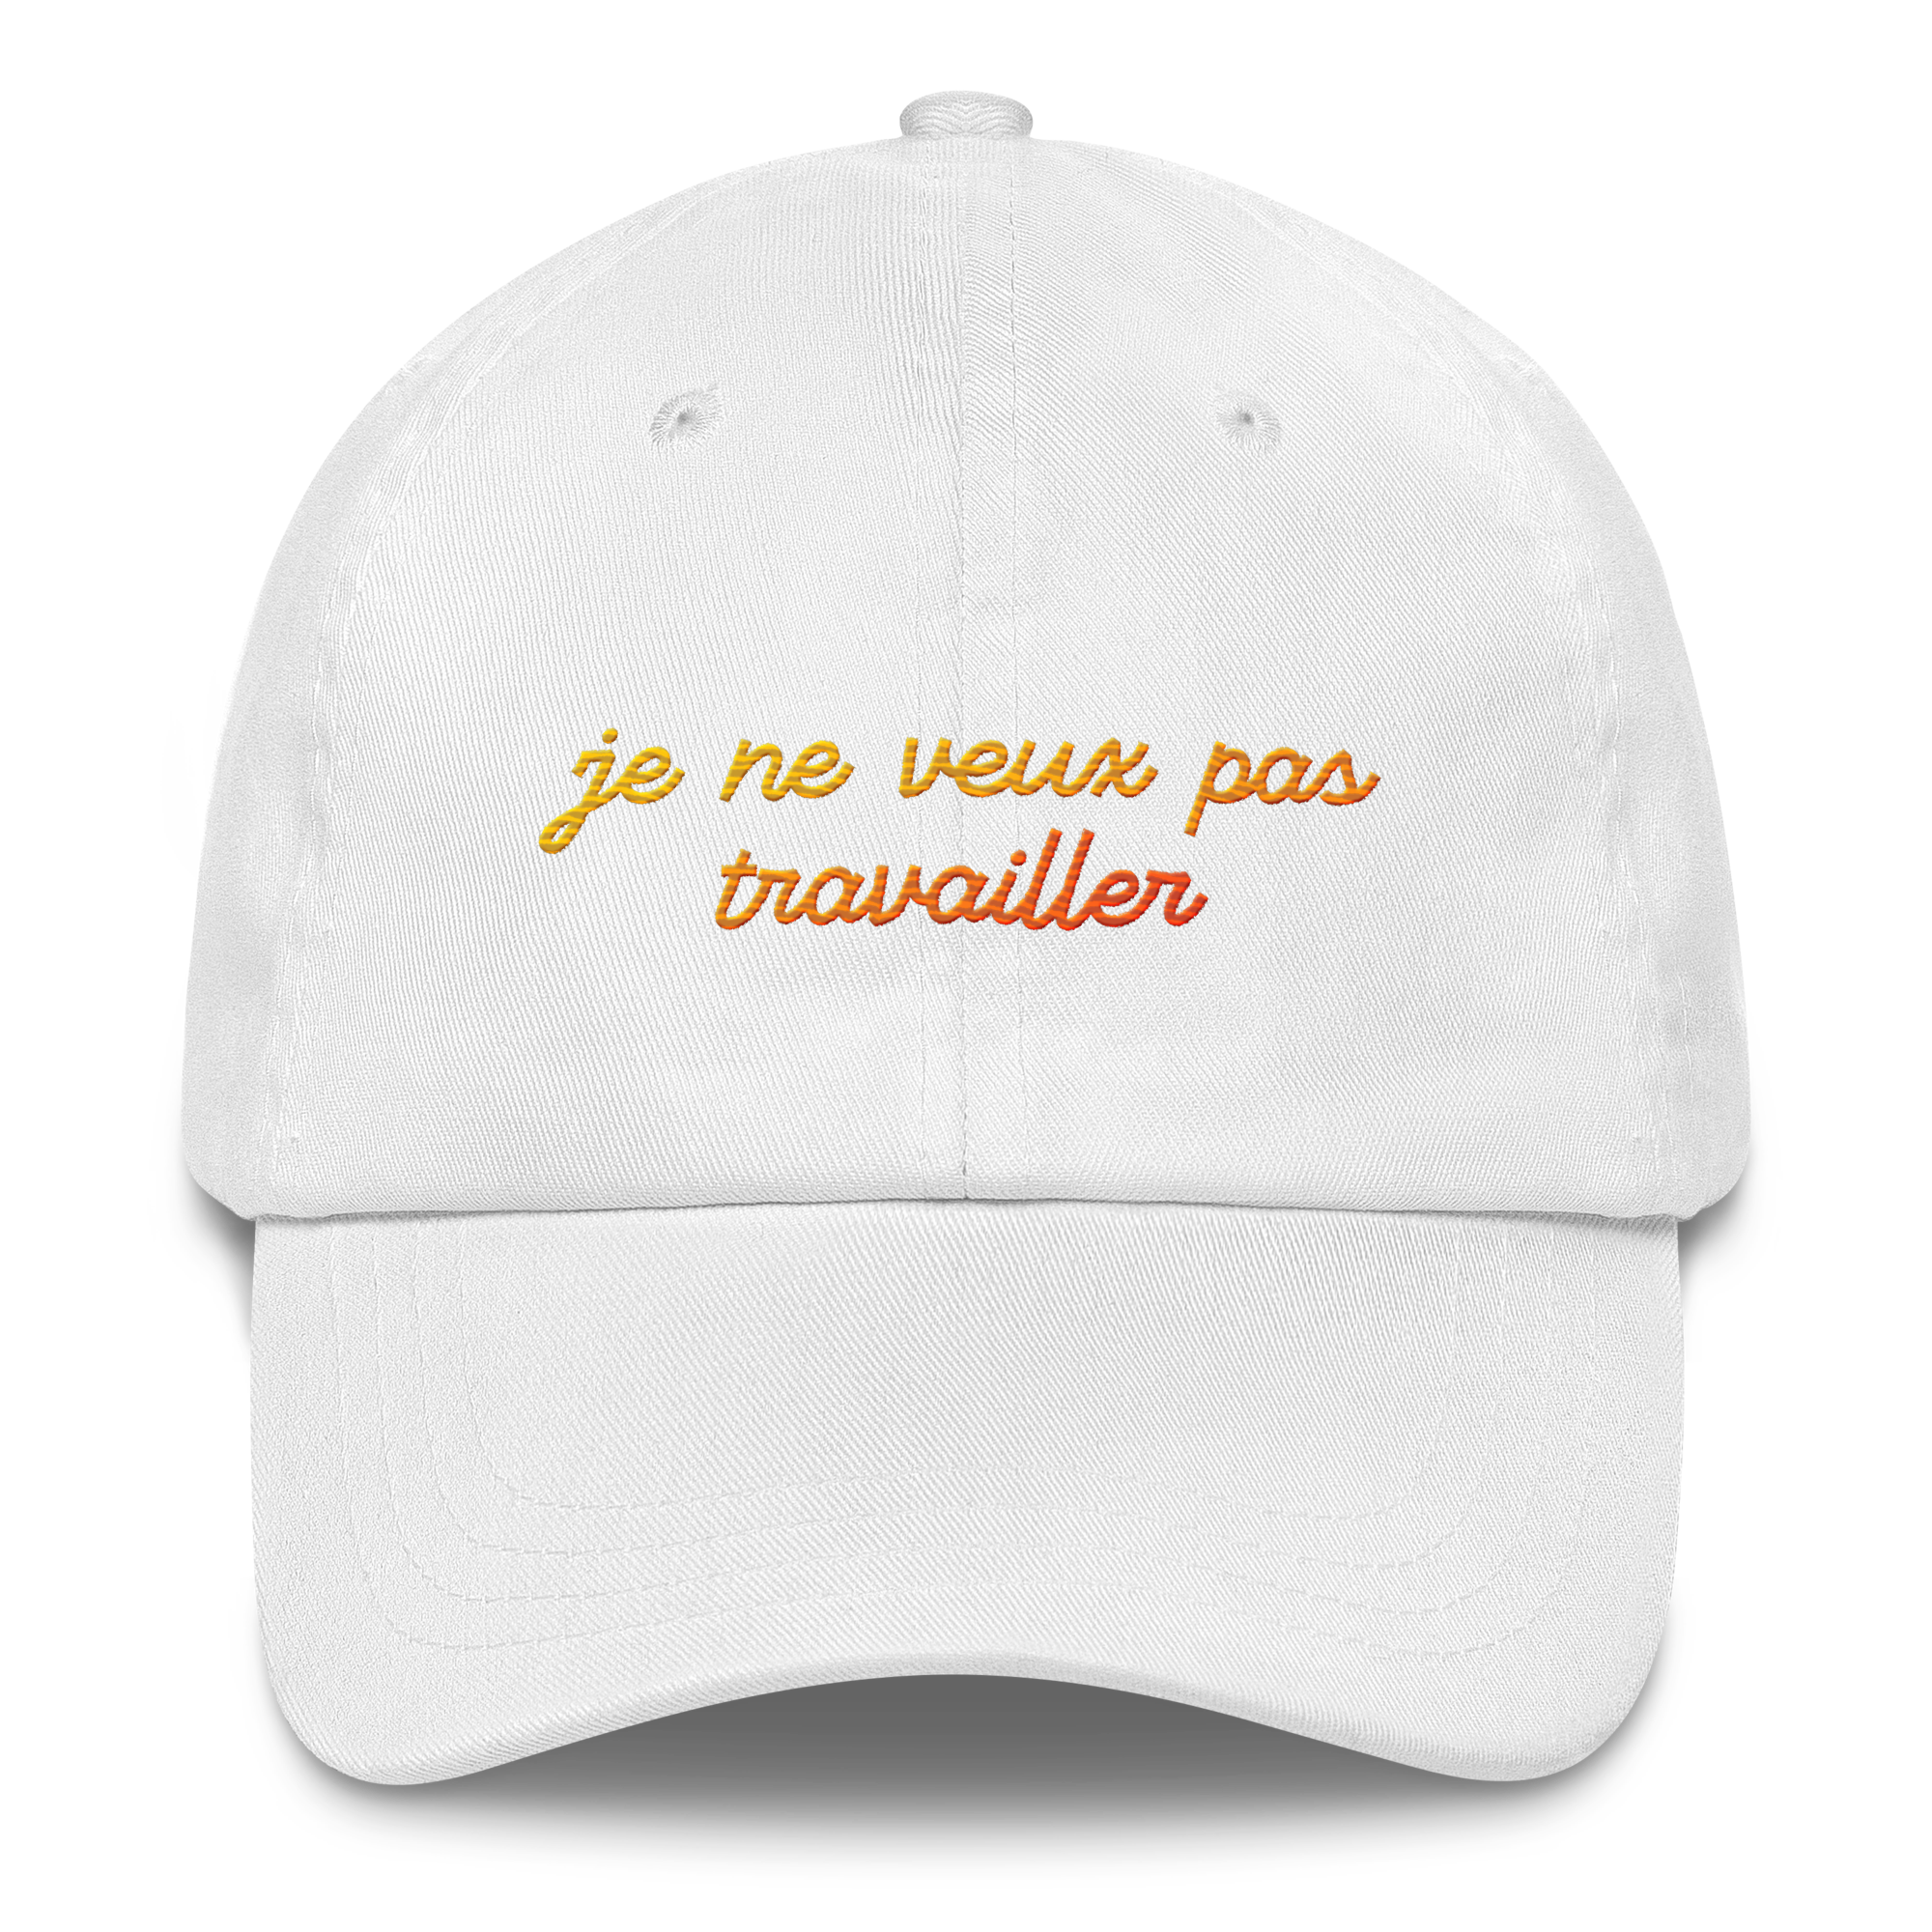 classic-dad-hat-white-front-6671b322ca8d2.png